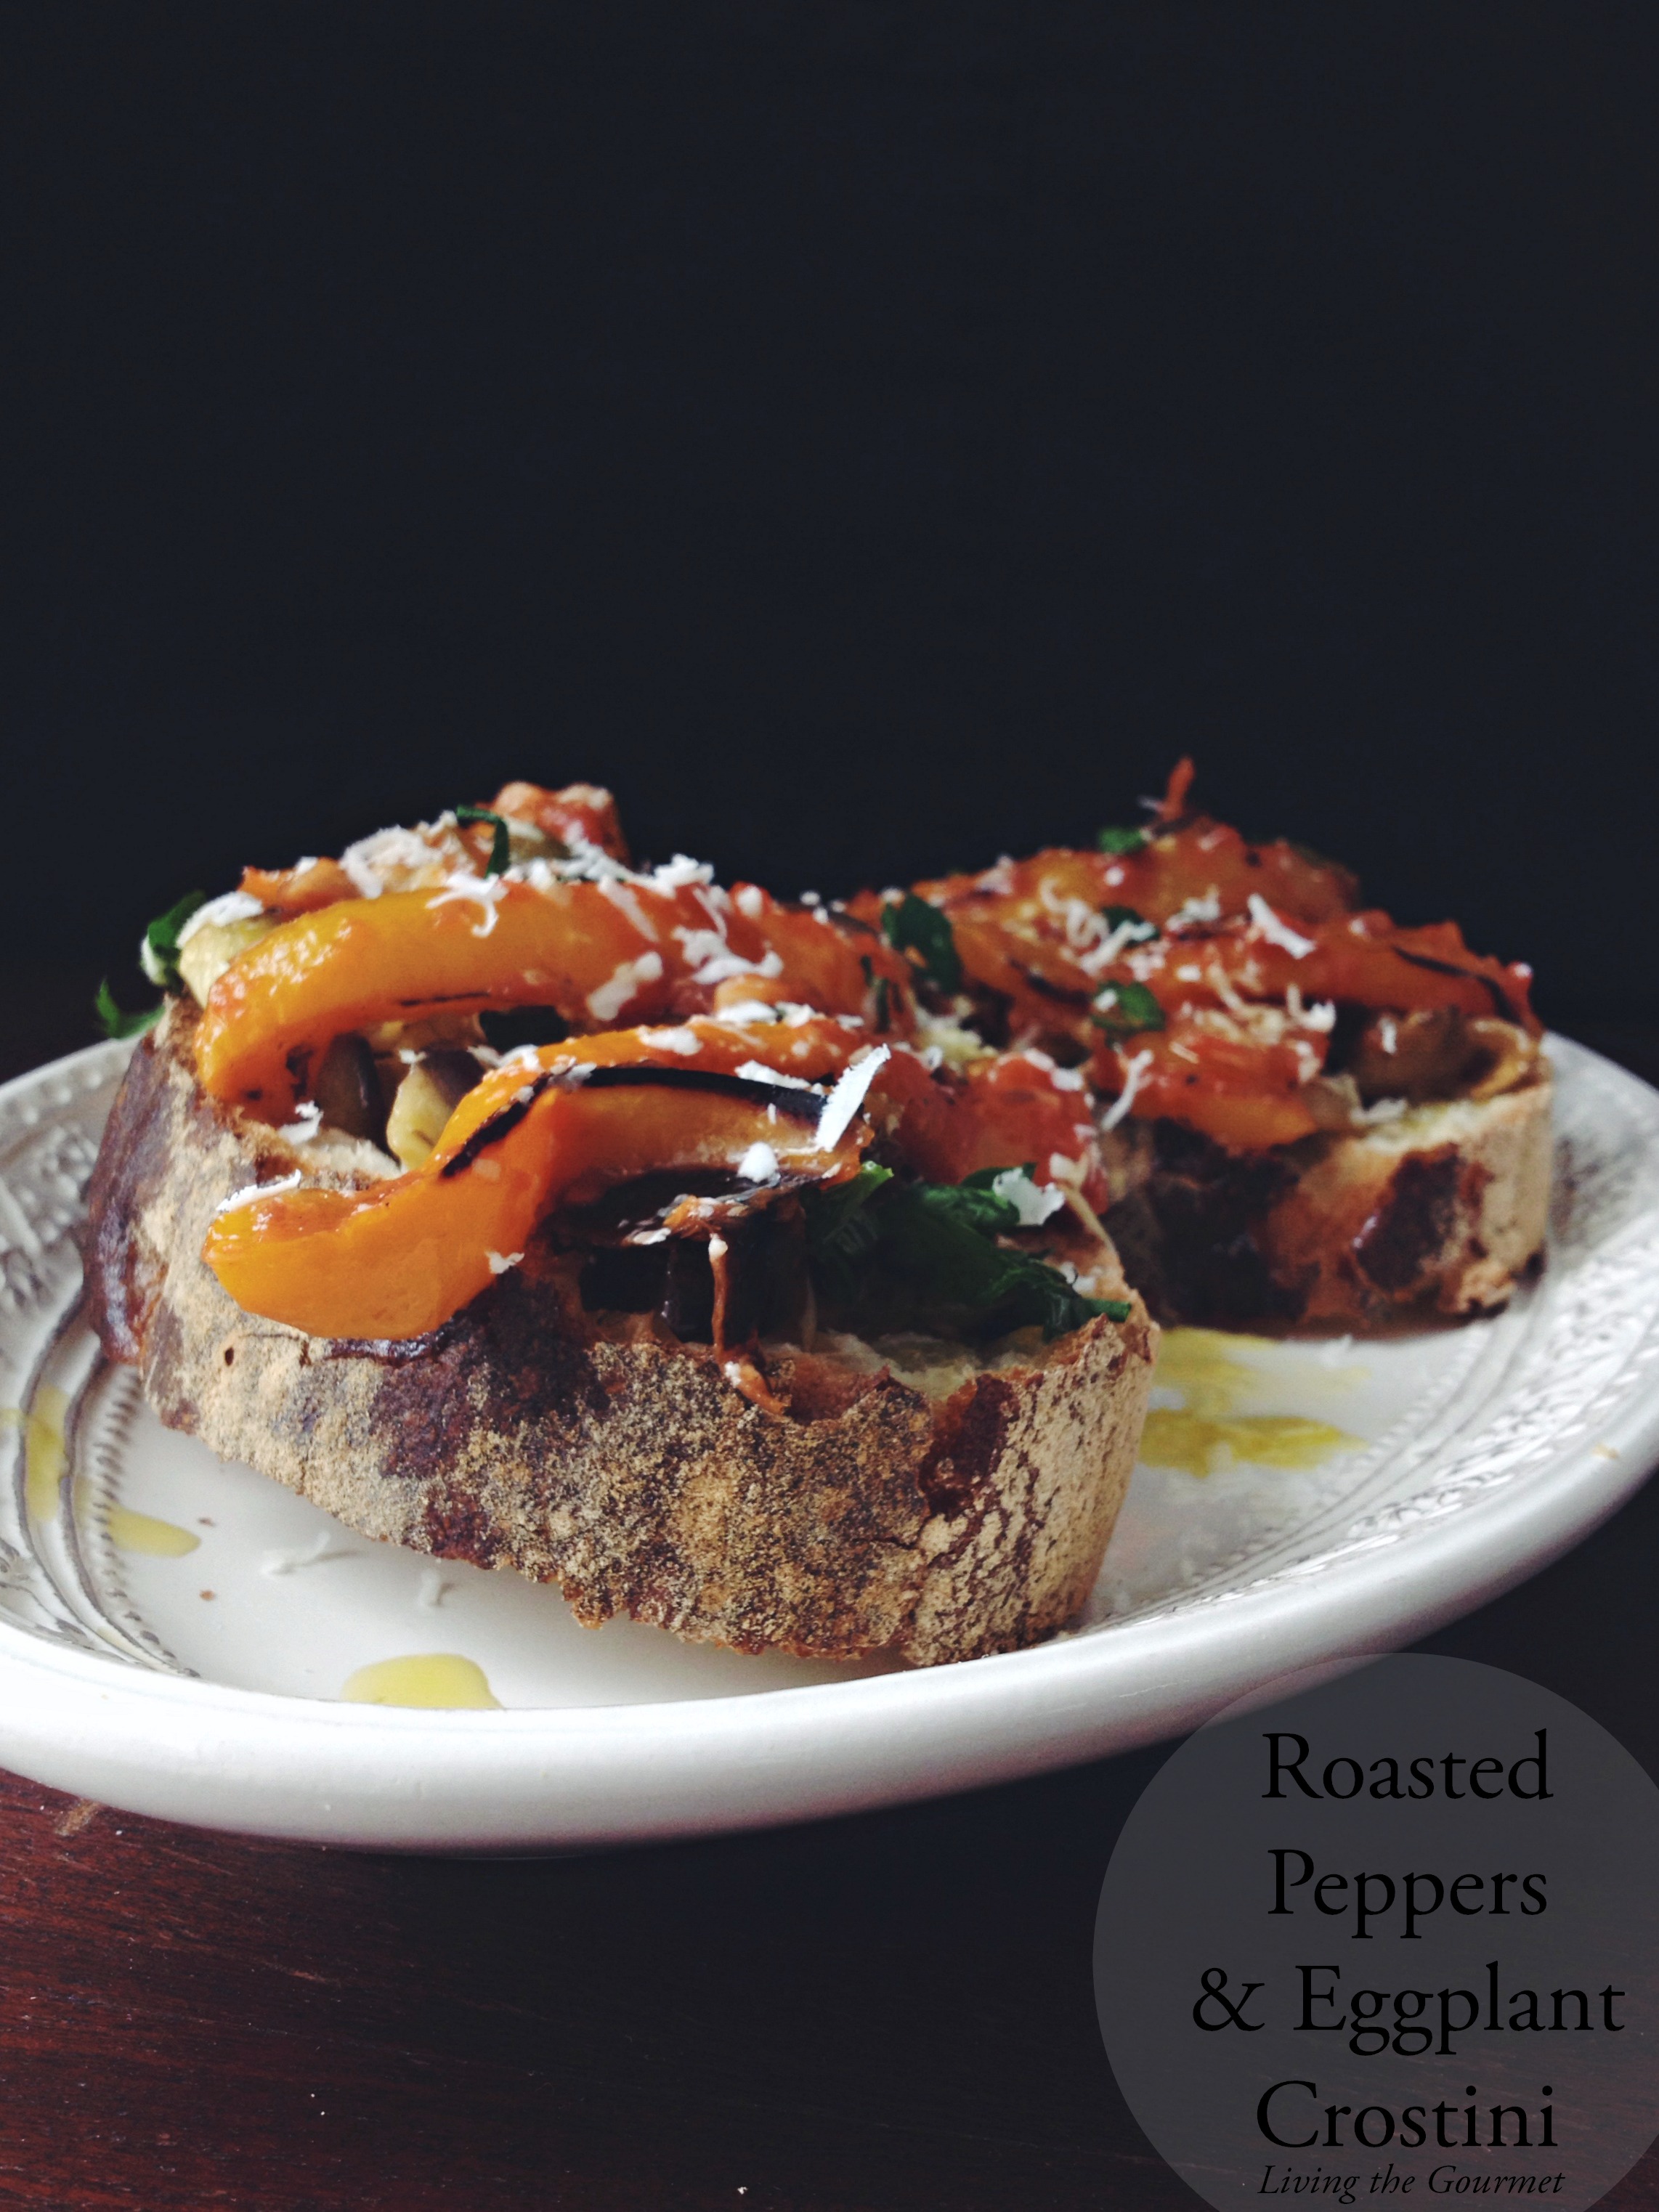 Living the Gourmet: Roasted Peppers & Eggplant Crostini